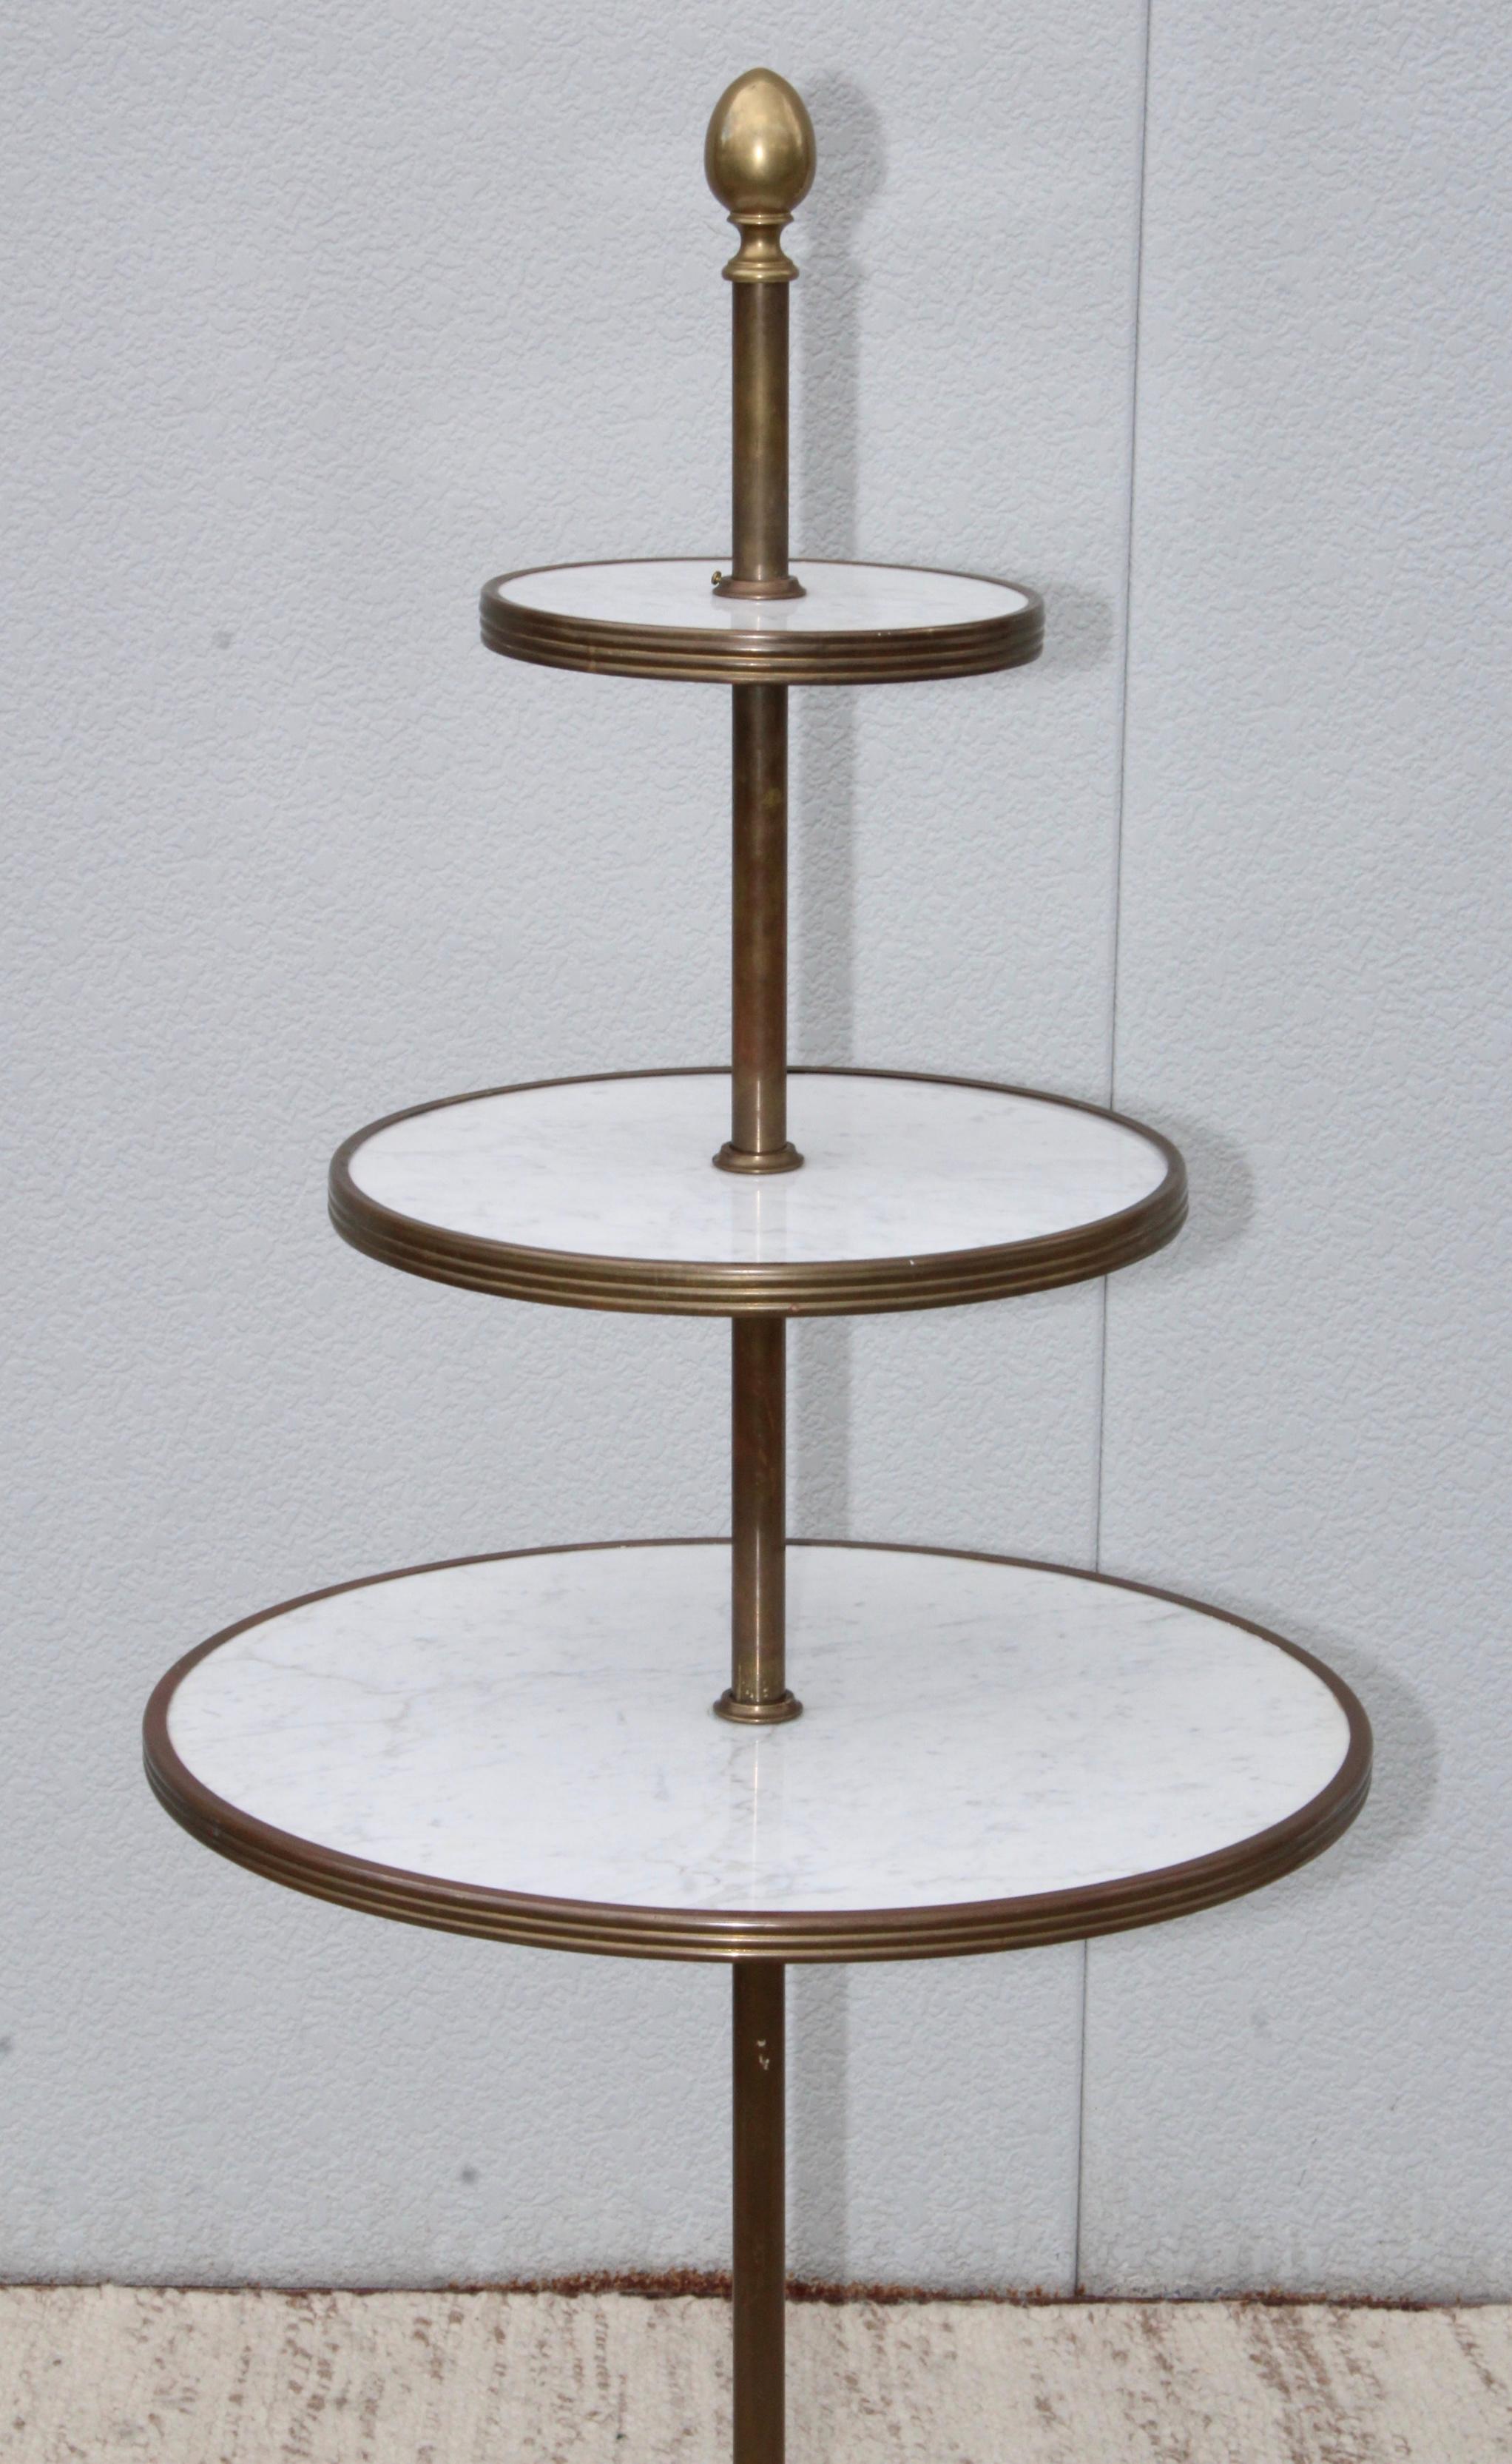 1960's solid brass and carrara marble 3 tier display shelf, in vintage original condition with some wear and patina due to age and use.